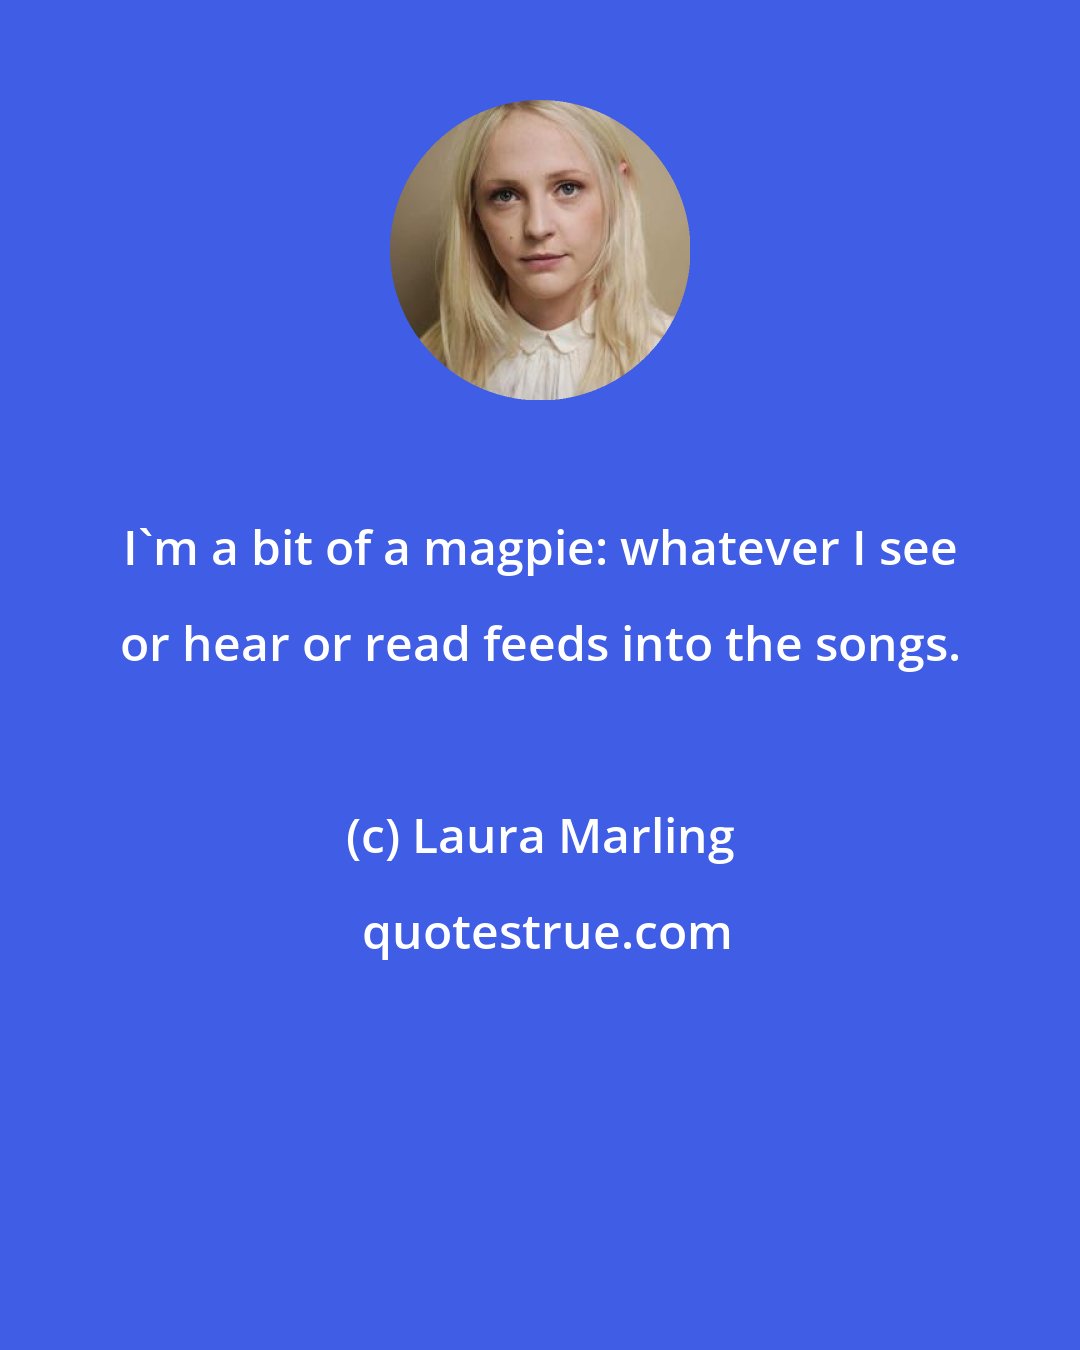 Laura Marling: I'm a bit of a magpie: whatever I see or hear or read feeds into the songs.